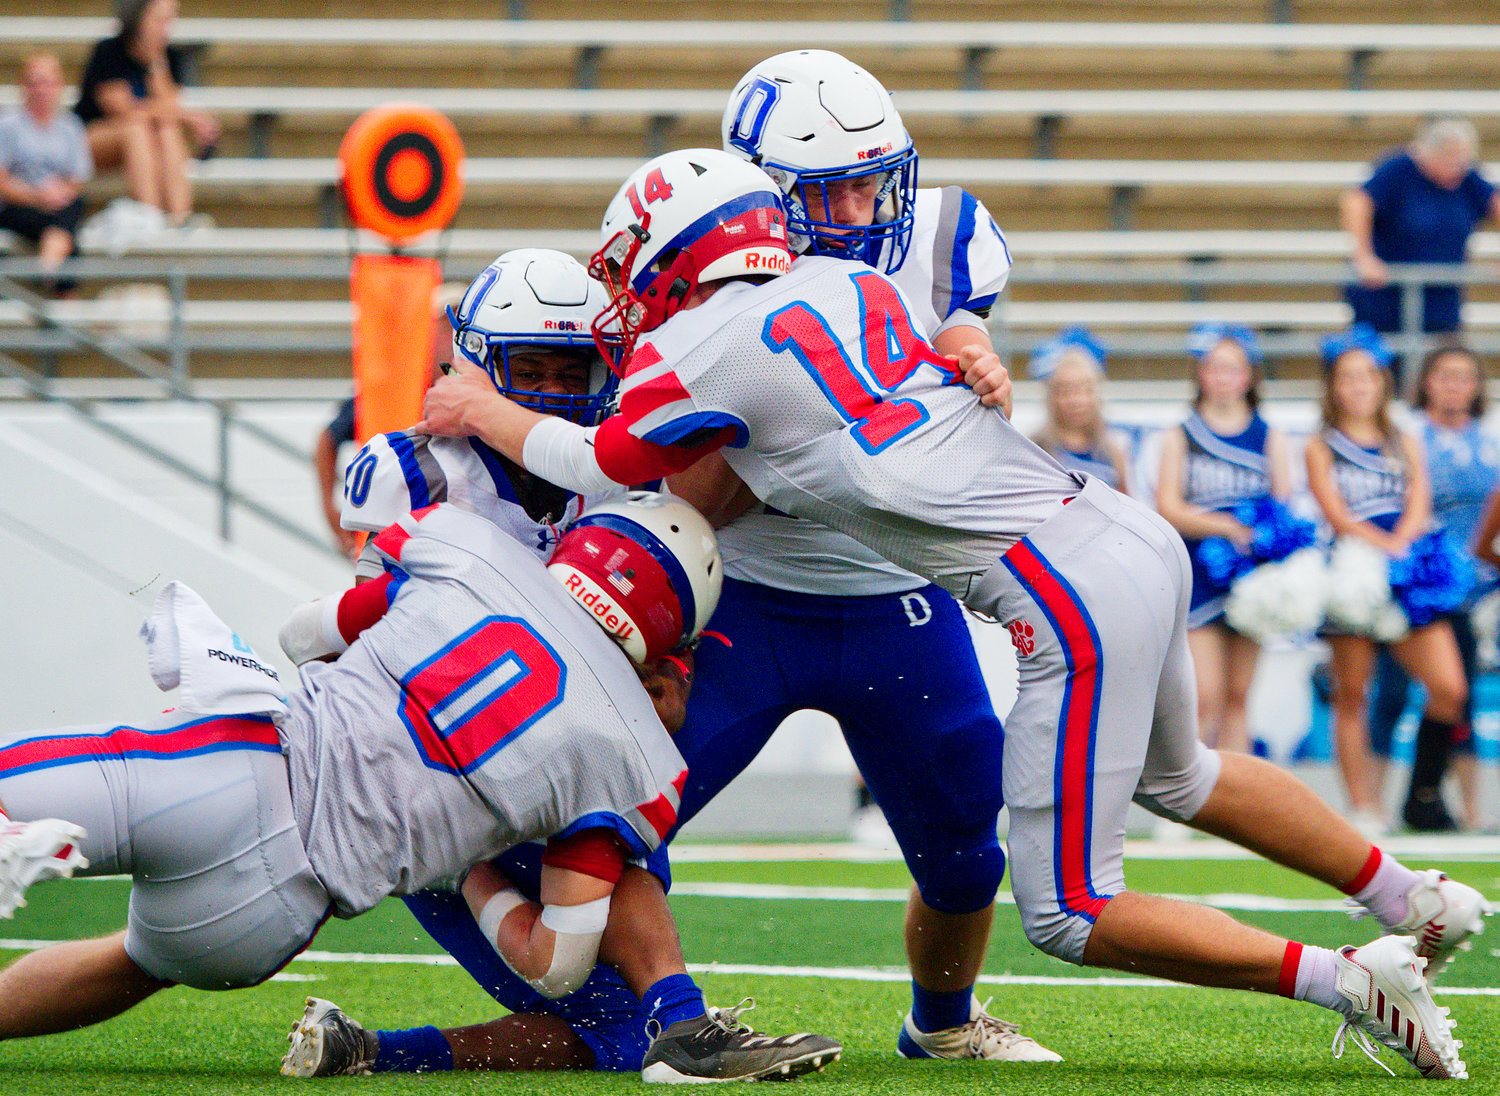 Jerry Skinner and Wyatt Sutton make the tackle for Alba-Golden. [find more football photos]